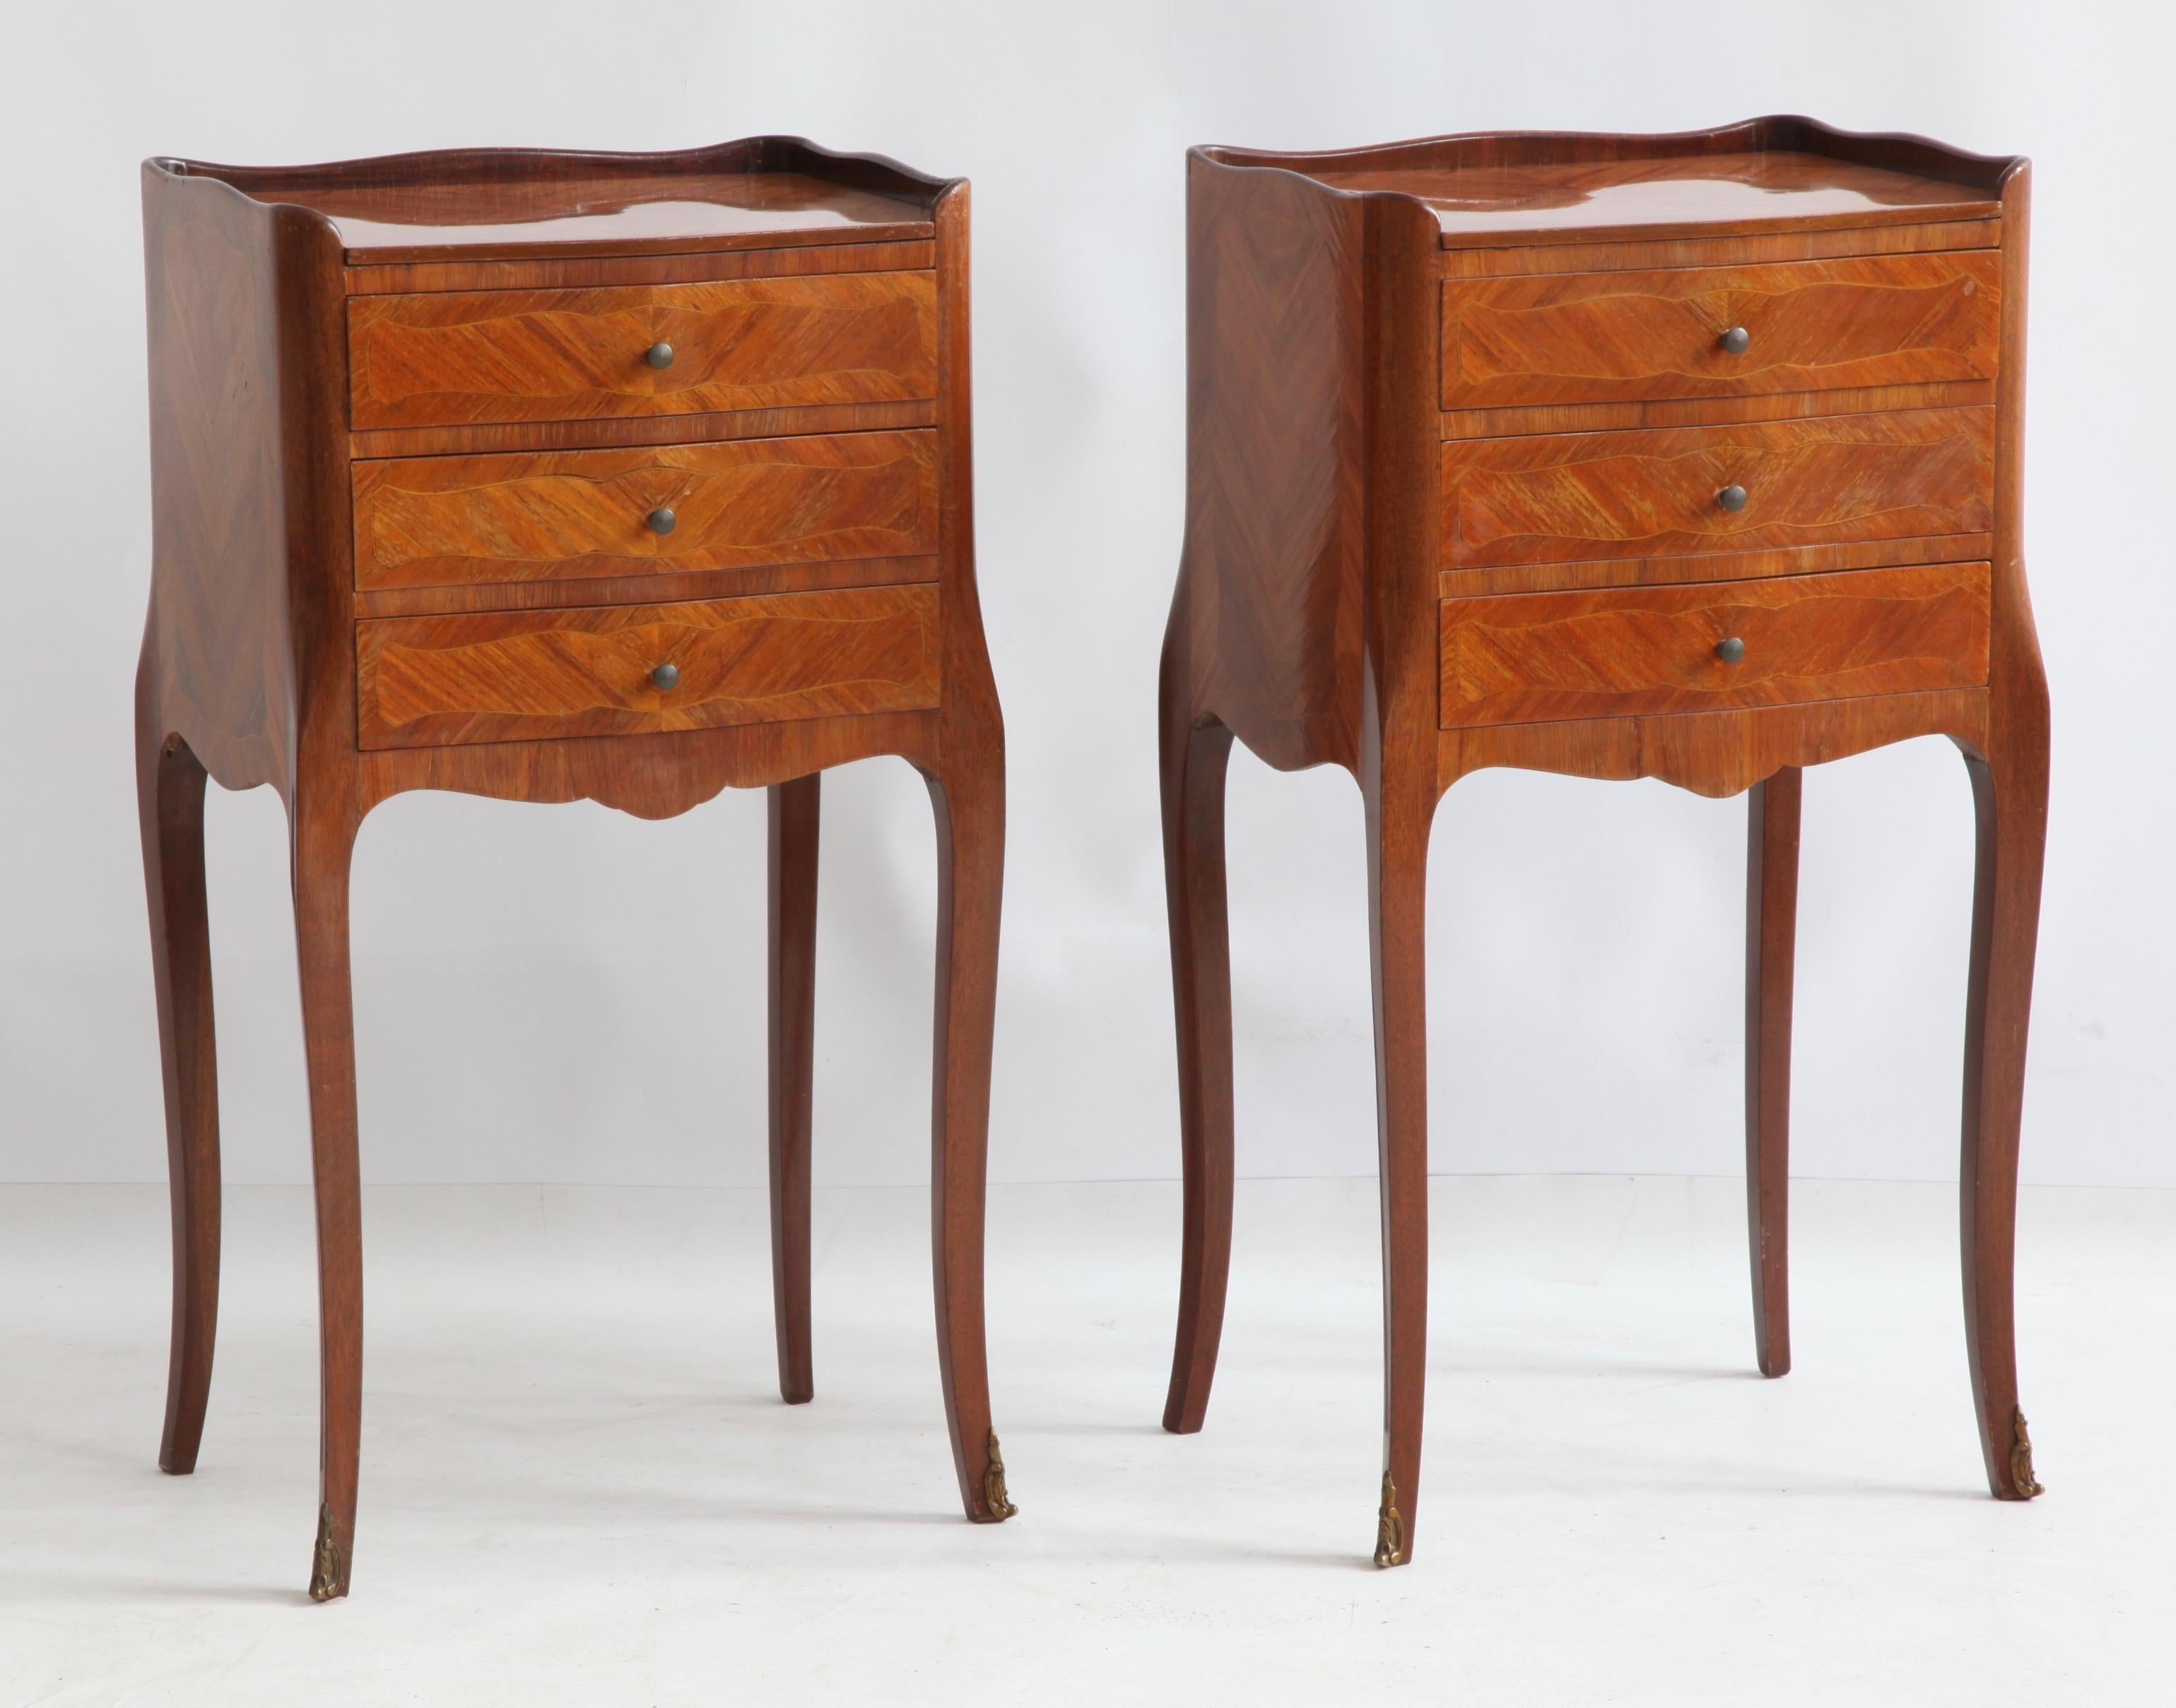 Pair of Louis XV style bedside tables.
Marquetry work with 3 drawers.
Serpentine legs with diamond shape top.